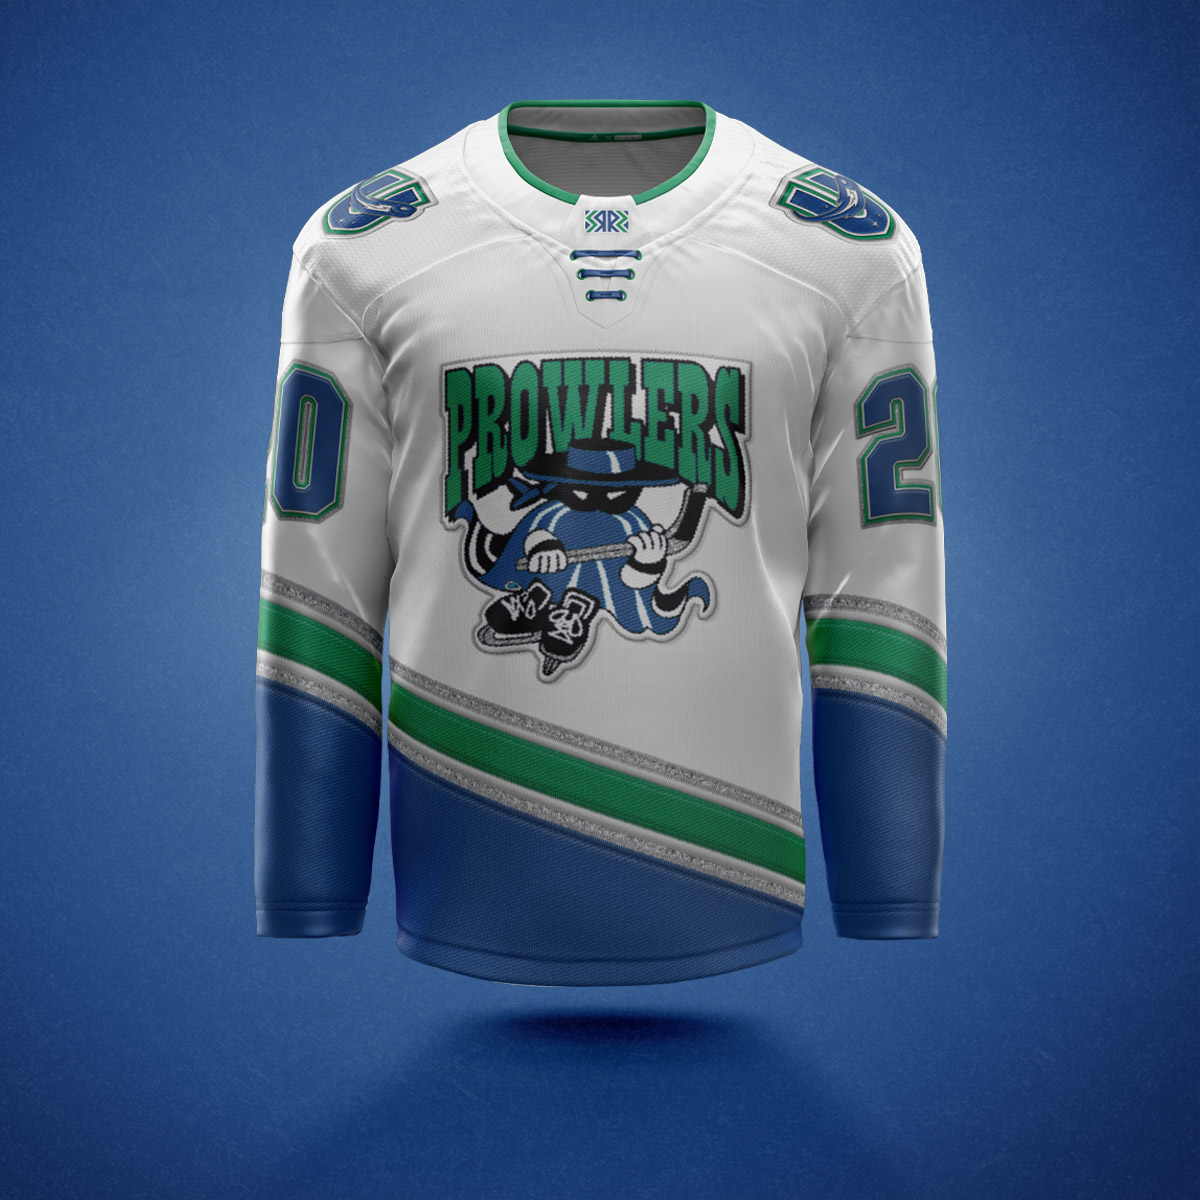 Comets looking forward to wearing special jerseys